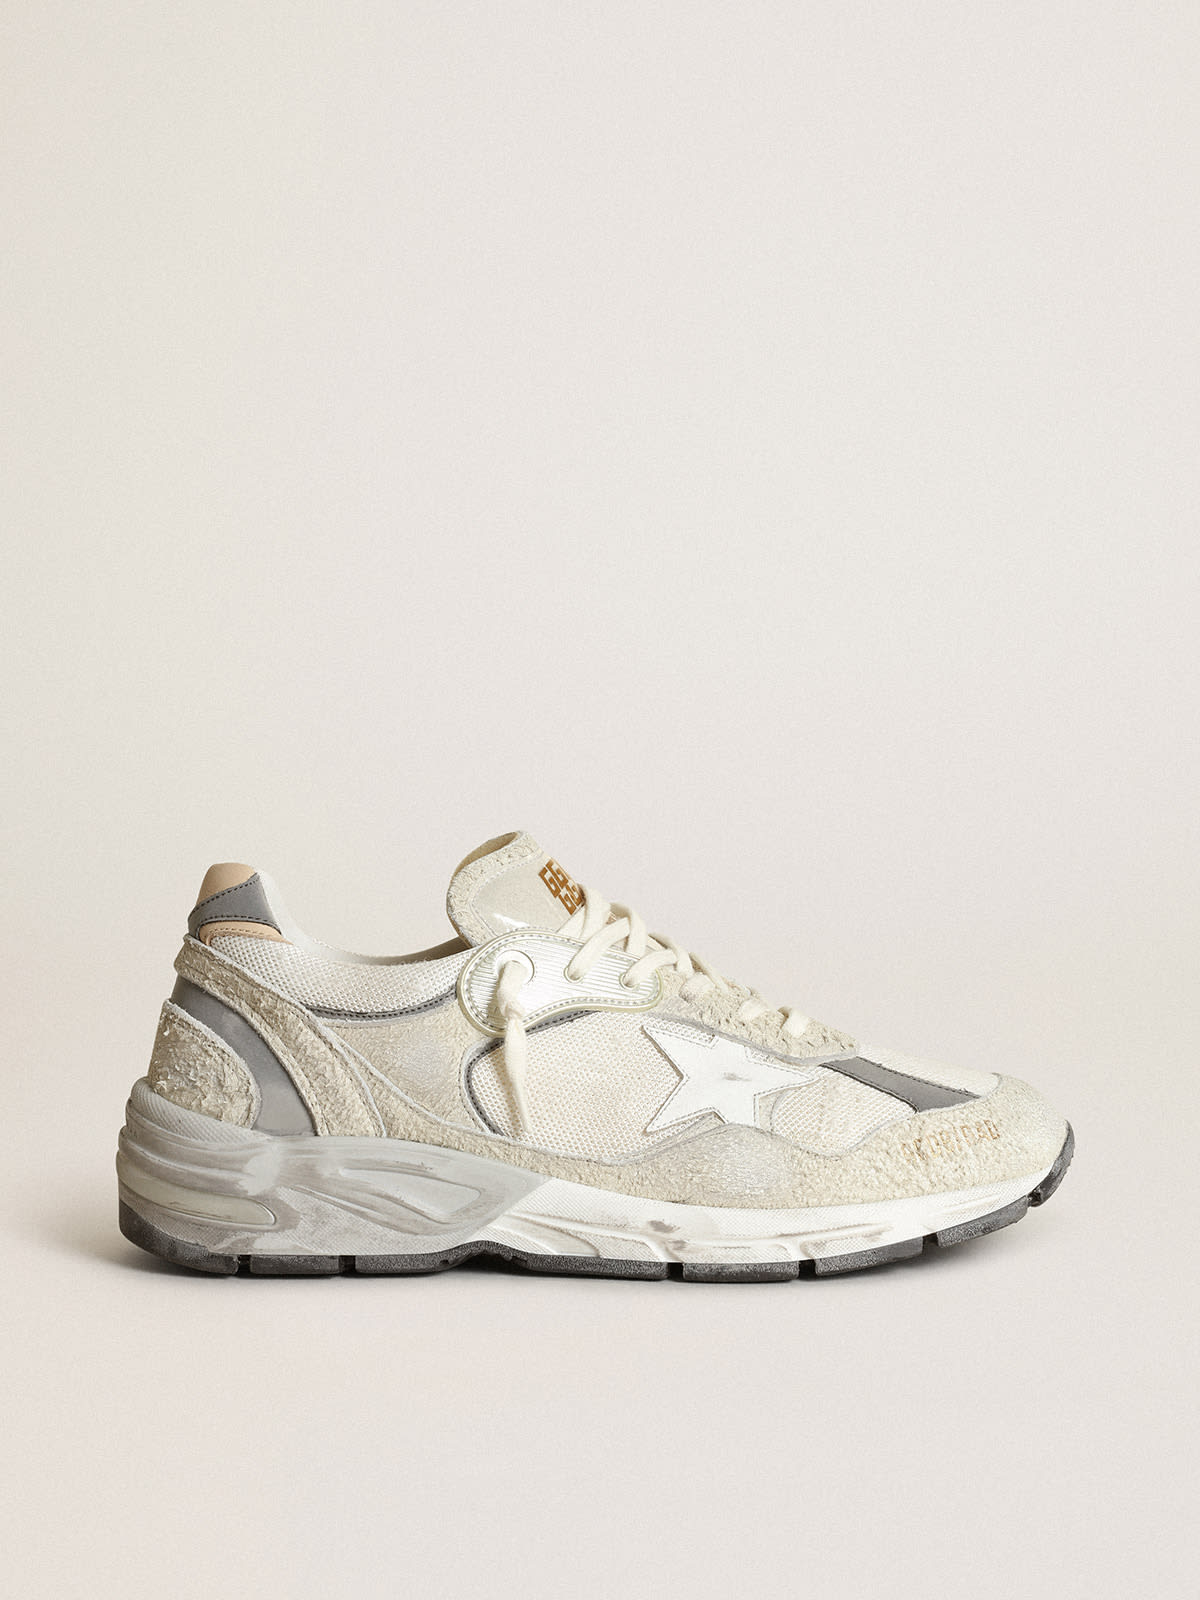 Dad-Star sneakers in white and gray suede with white leather star